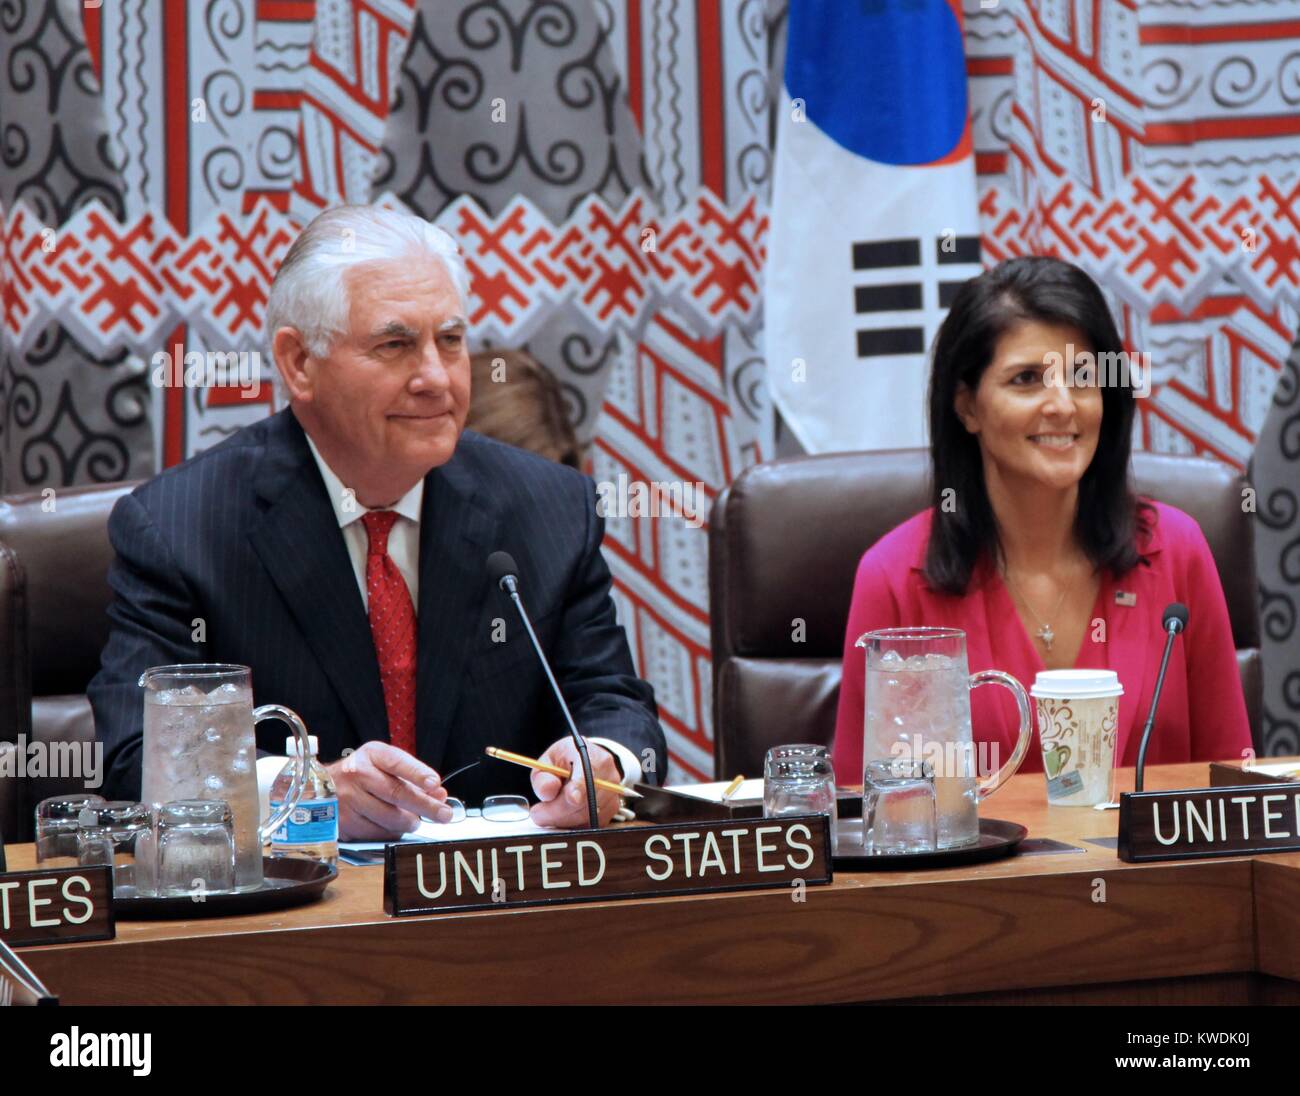 US Secretary Tillerson and UN Ambassador Nikki Haley meet with East Asian allies, April 28, 2017. At the United Nations, New York City (BSLOC 2017 18 131) Stock Photo